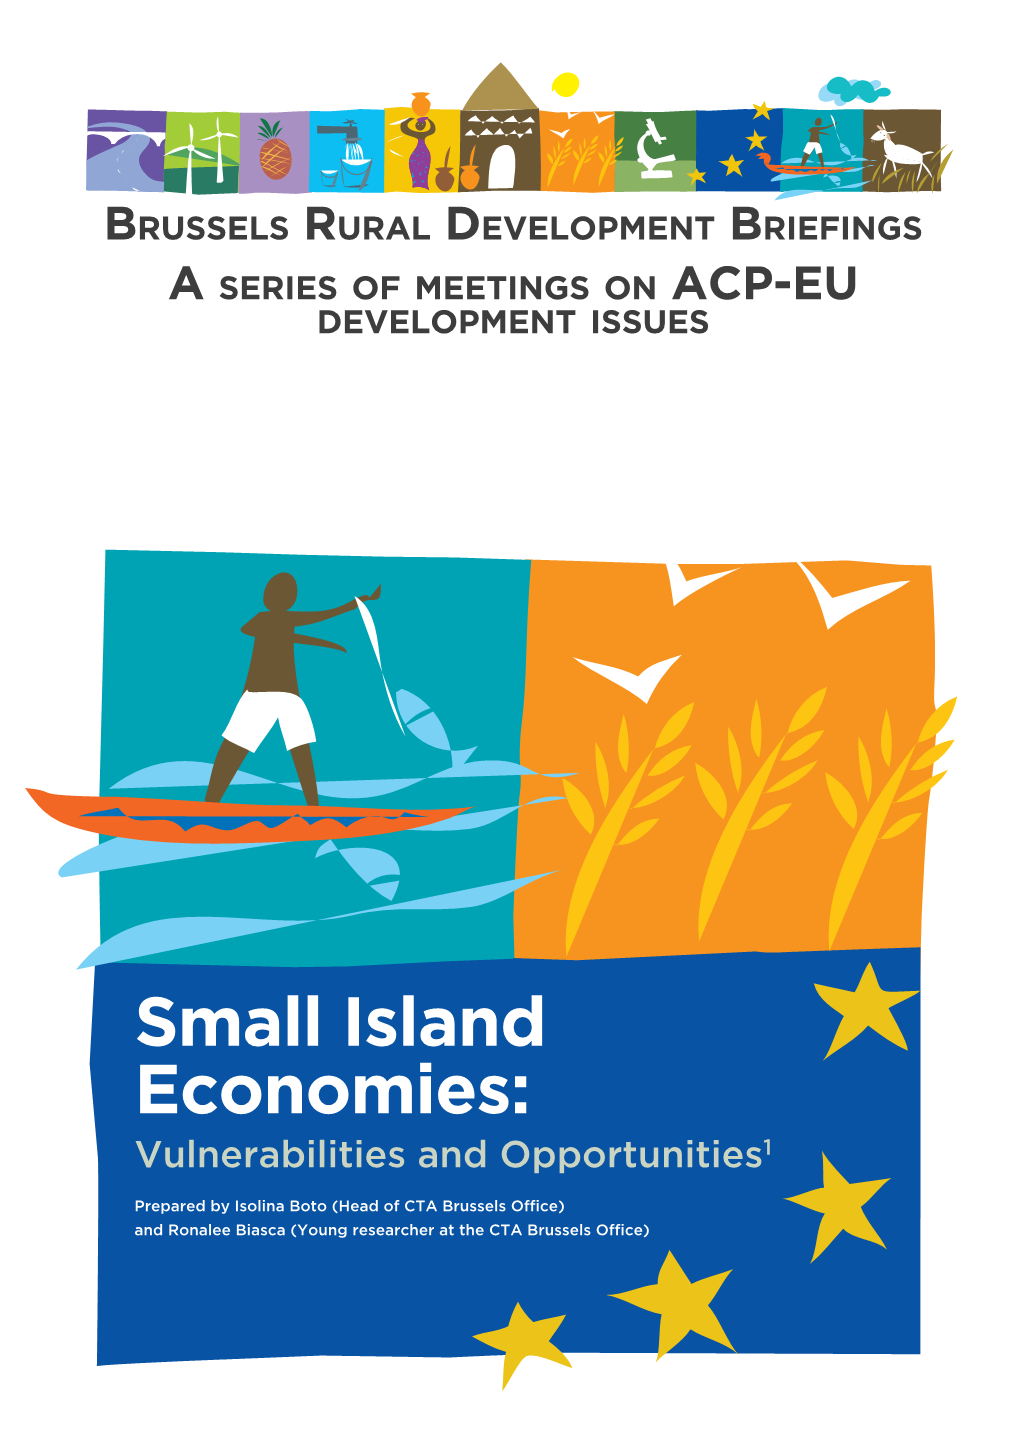 Small Island Economies: Vulnerabilities and Opportunities1